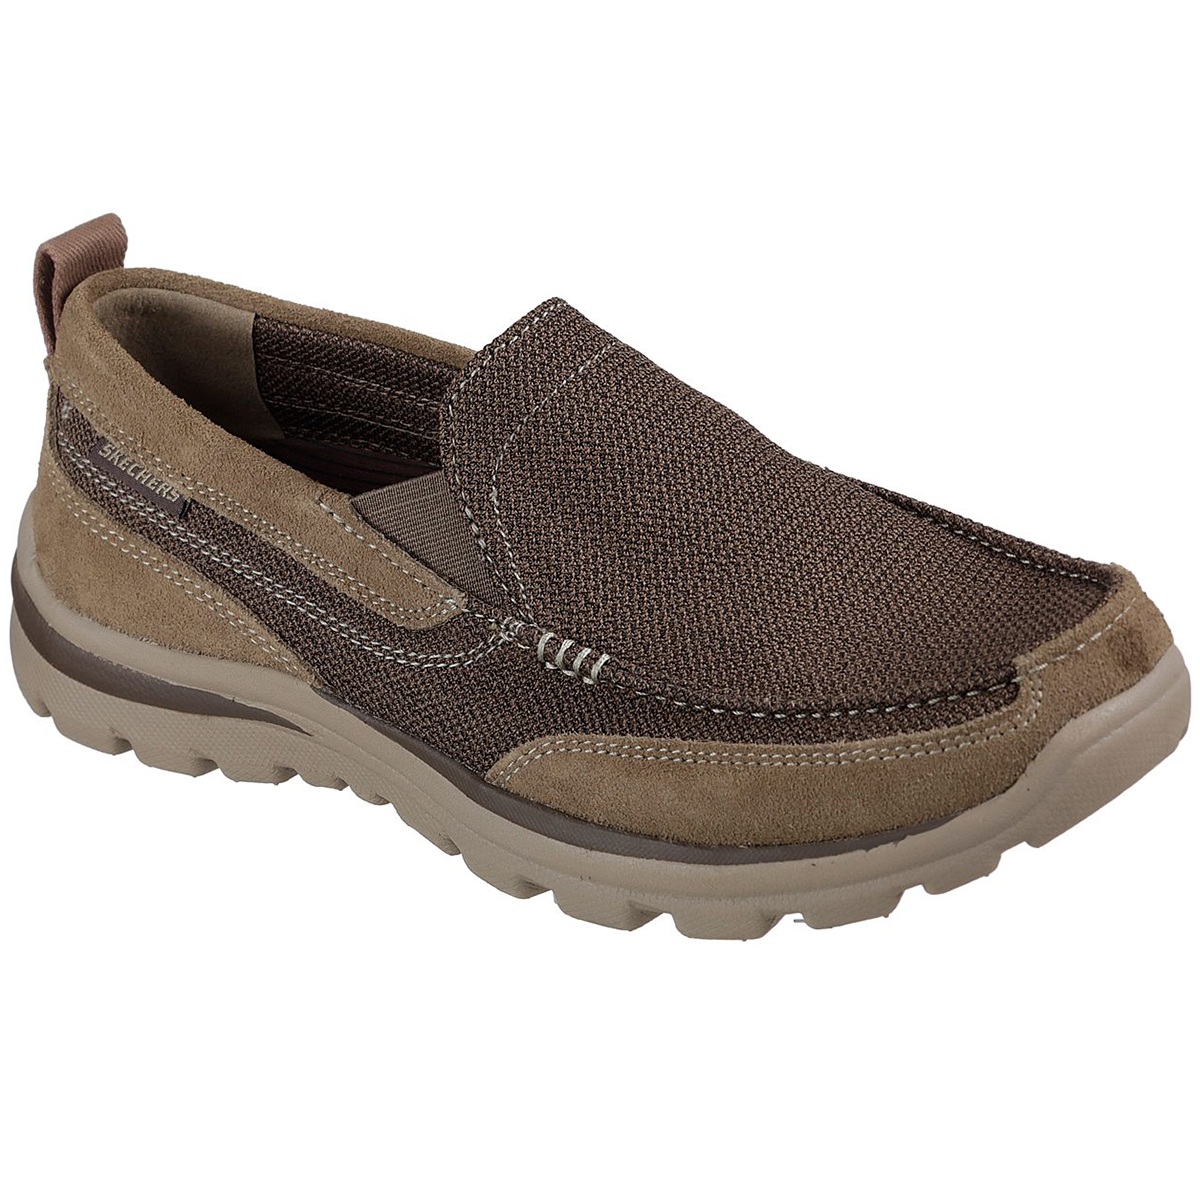 Skechers Men's Relaxed Fit: Superior- Milford Slip-On Shoes - Brown, 13